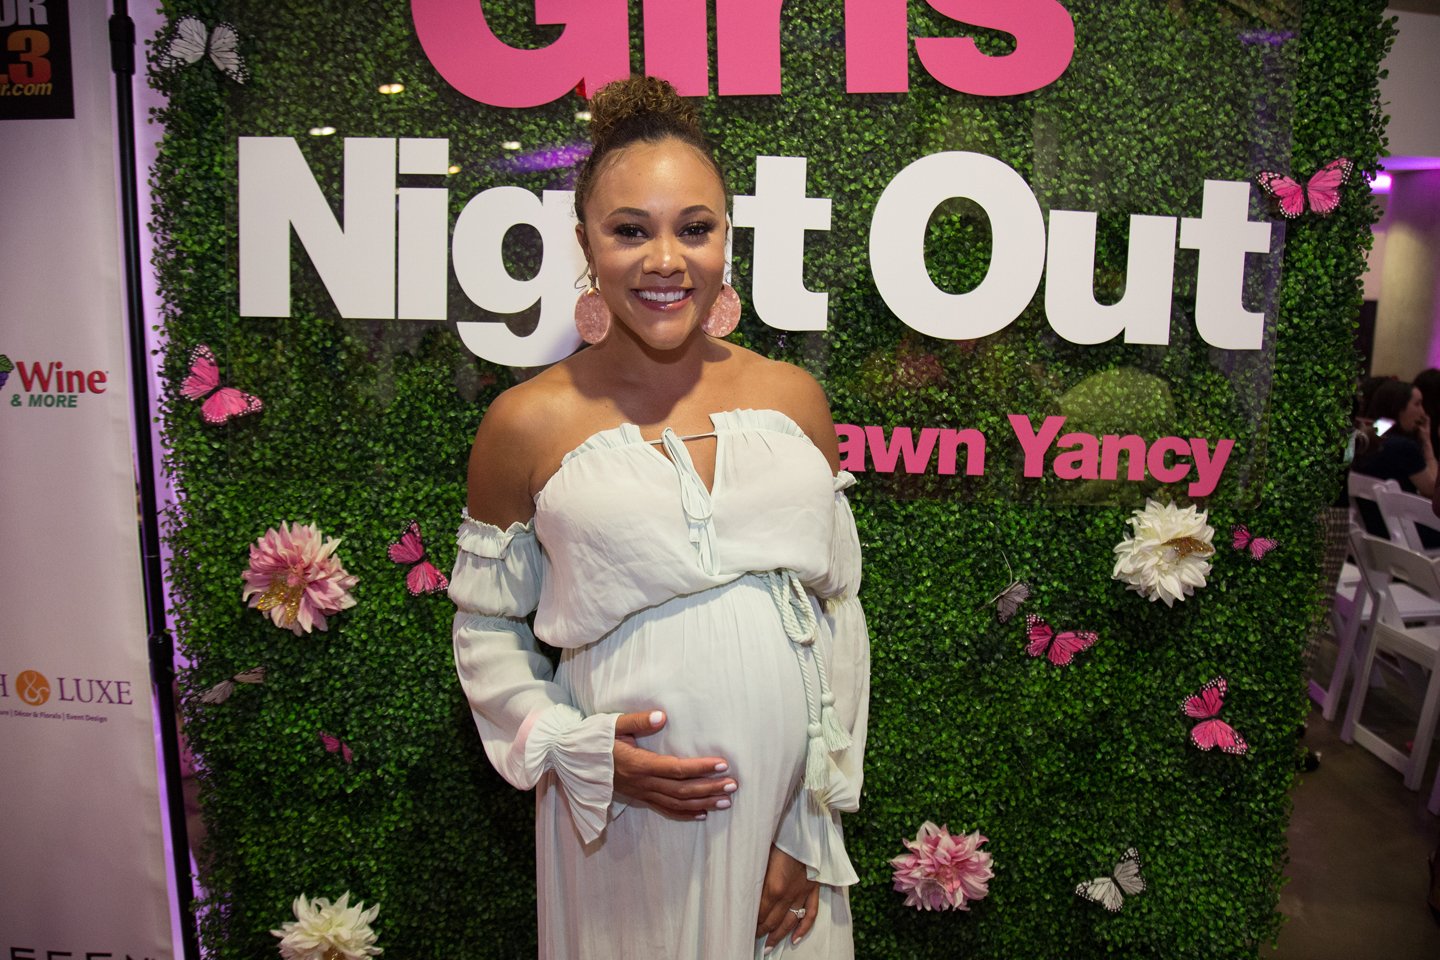 Ashley Boalch Darby attends 11th Annual Girls' Night Out